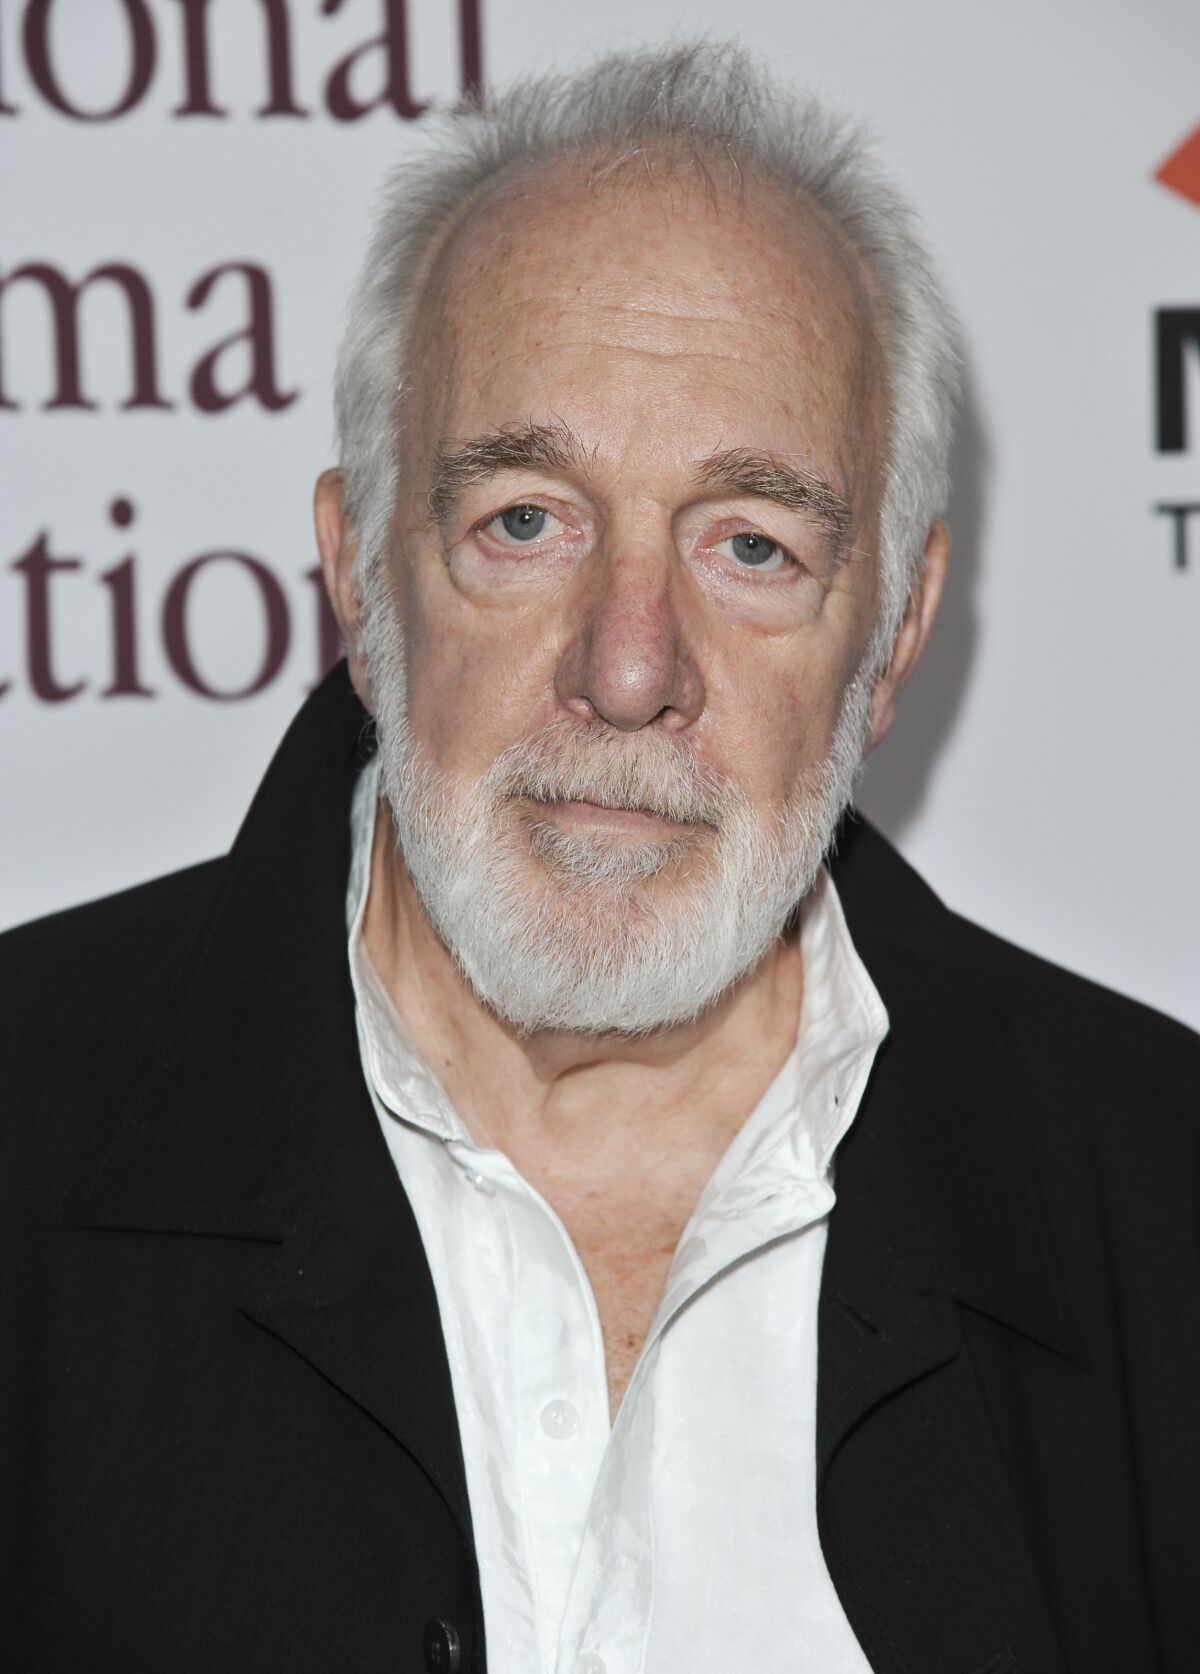 A silver-haired man with a beard. 